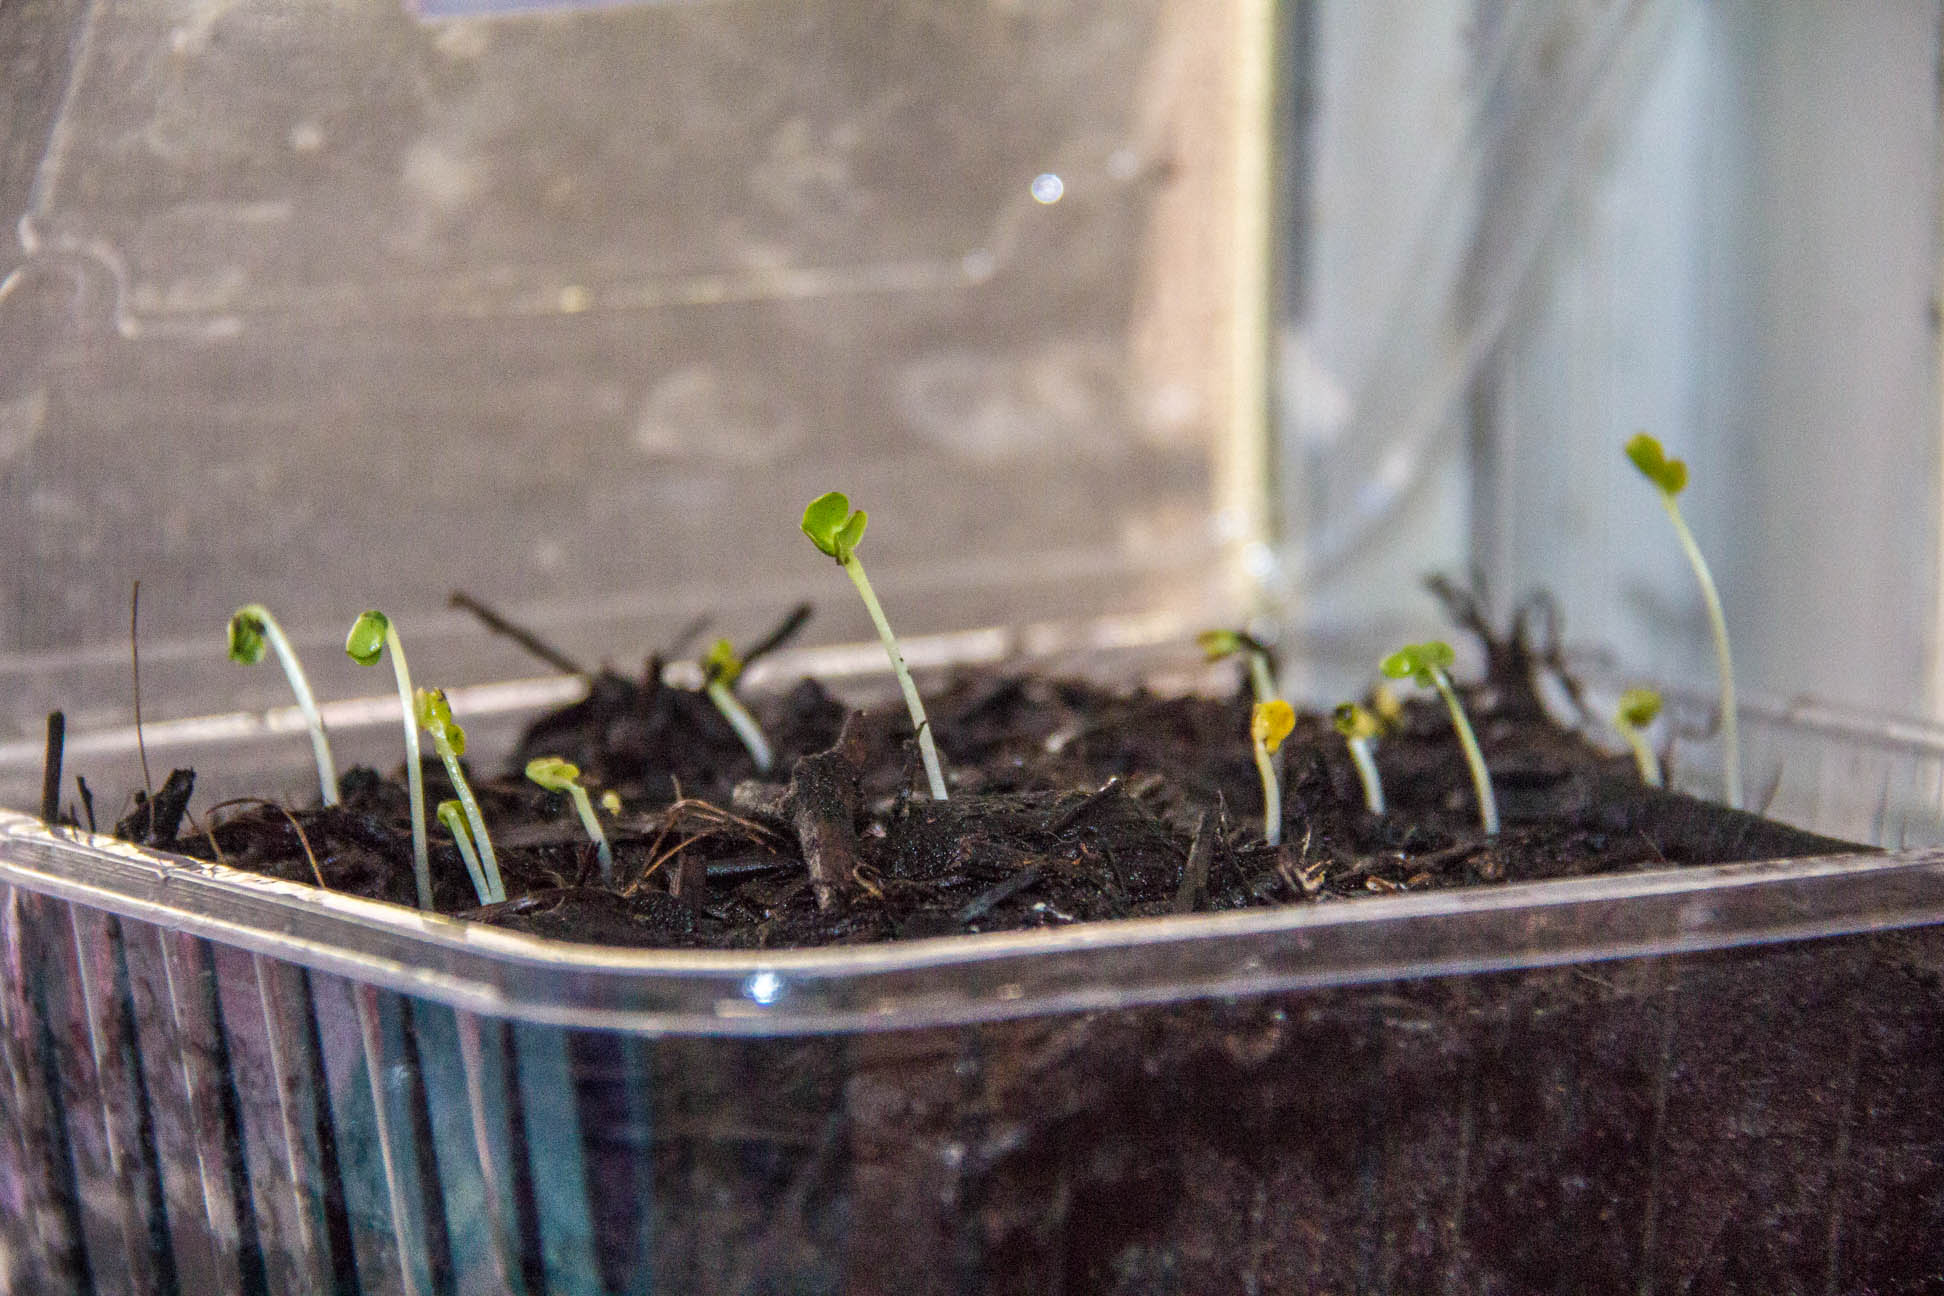 30/04/15 Day 7 more growth. I have no idea what these seedlings are.. Hind sight, going to plant seeds in individual pots with it's own kind.